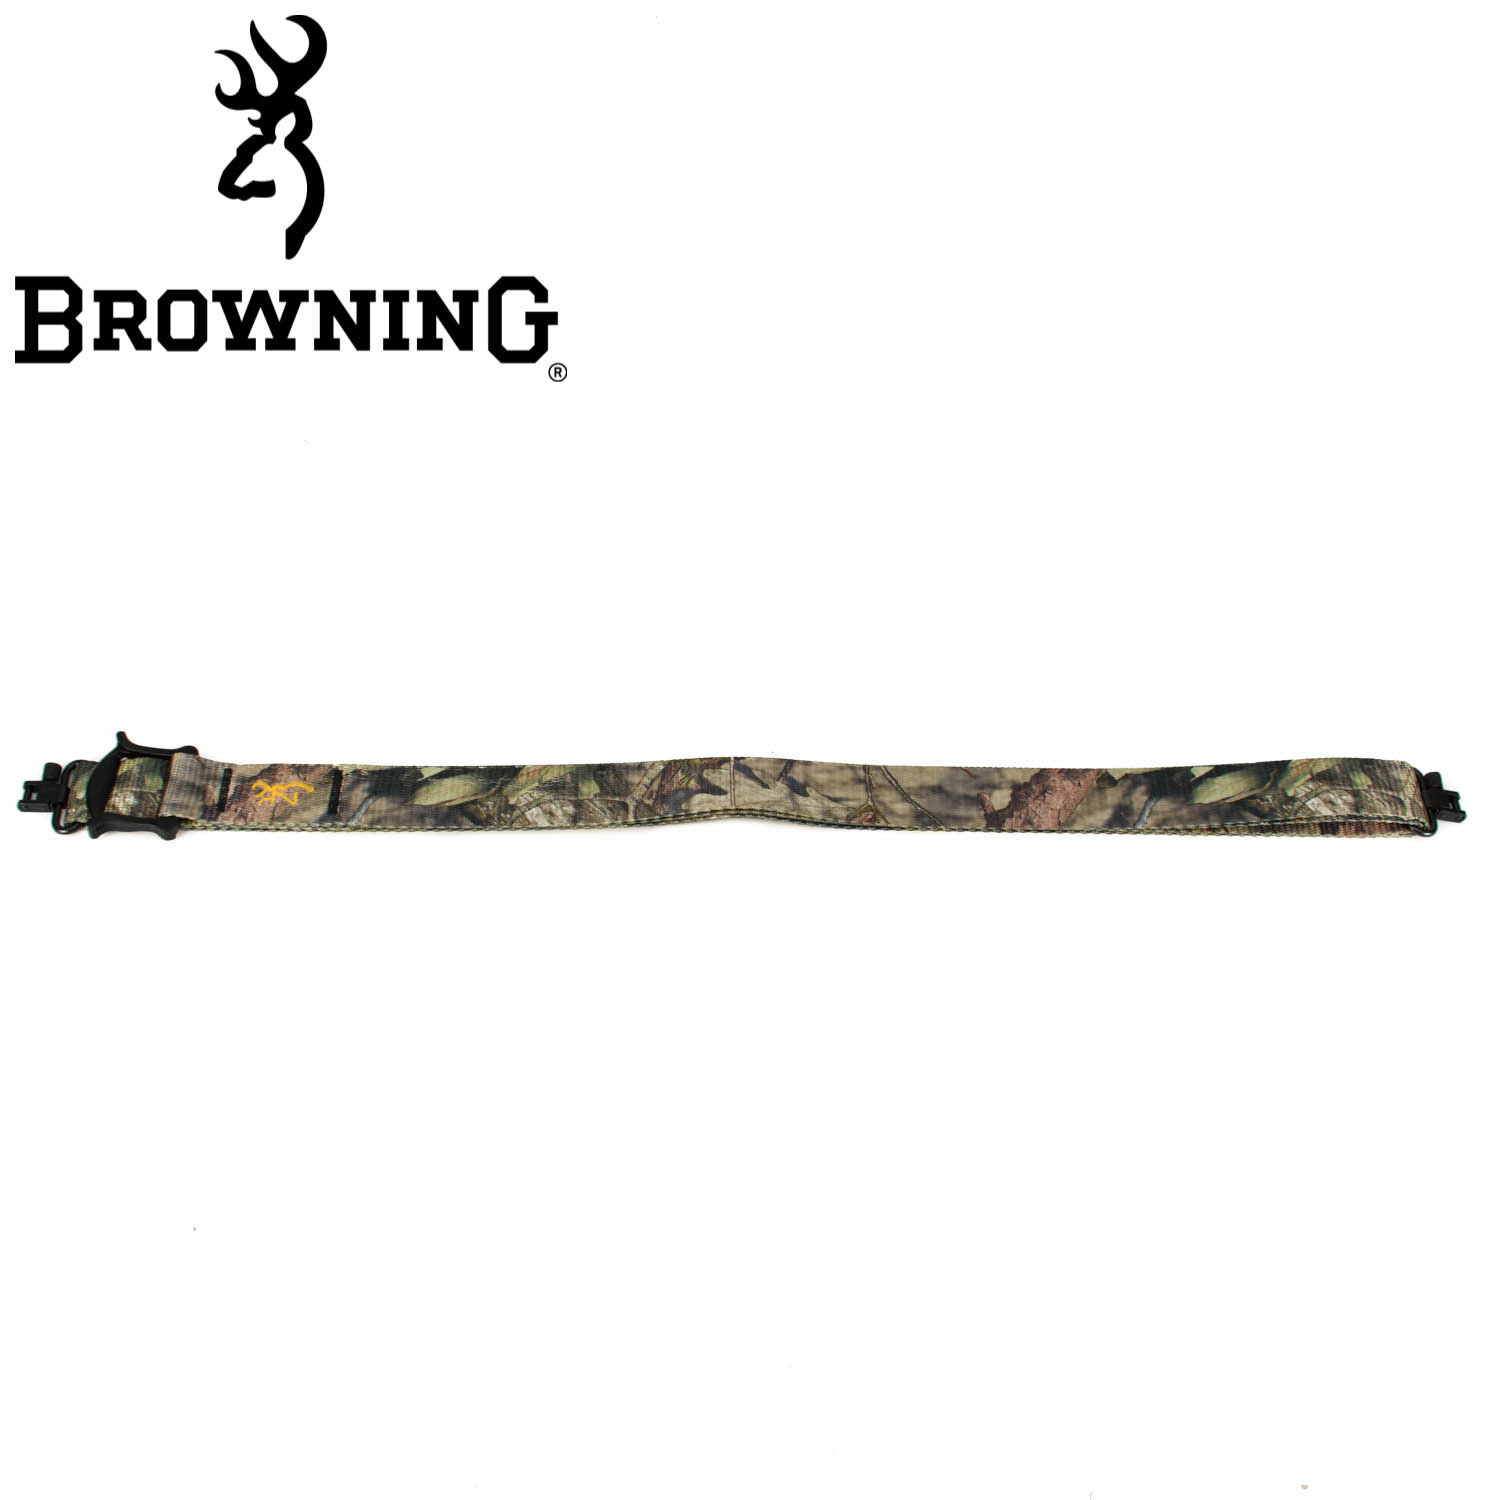 Details about   Lot of 2 BROWNING  X-CELLERATOR  25" SLINGS  Mossy Oak Break Up     Ships Free! 